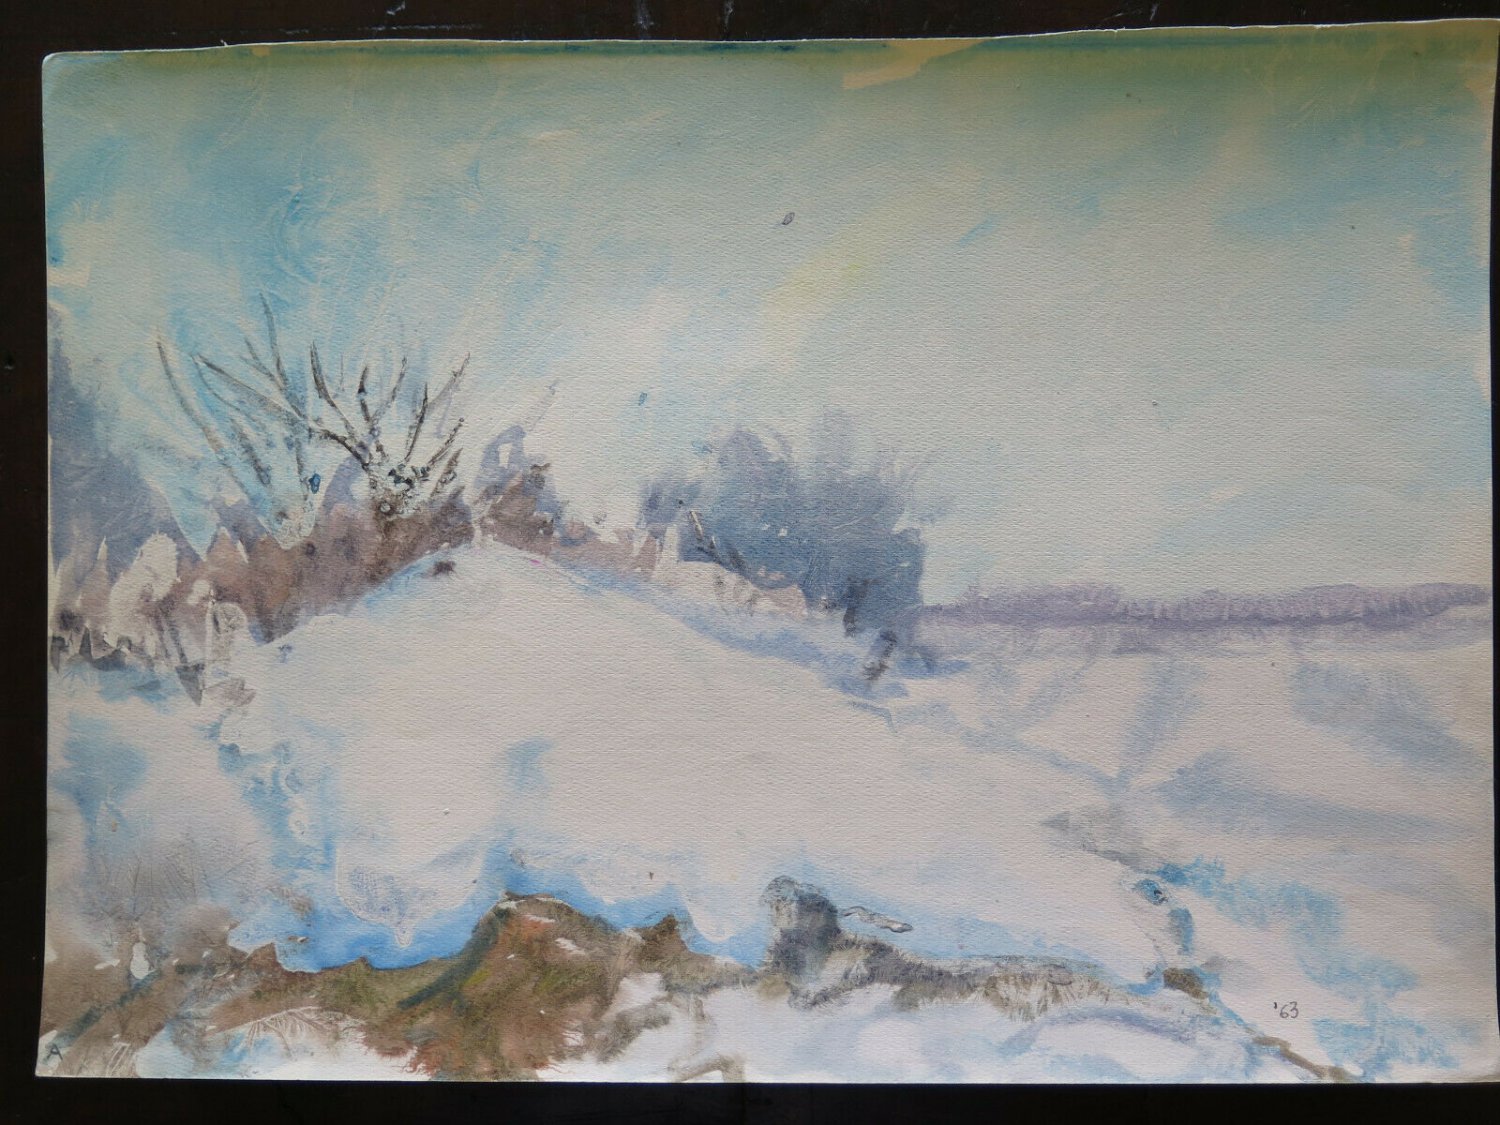 19 11/16x14 3/16in Painting Onirico With The Technical Frost landscape Winter